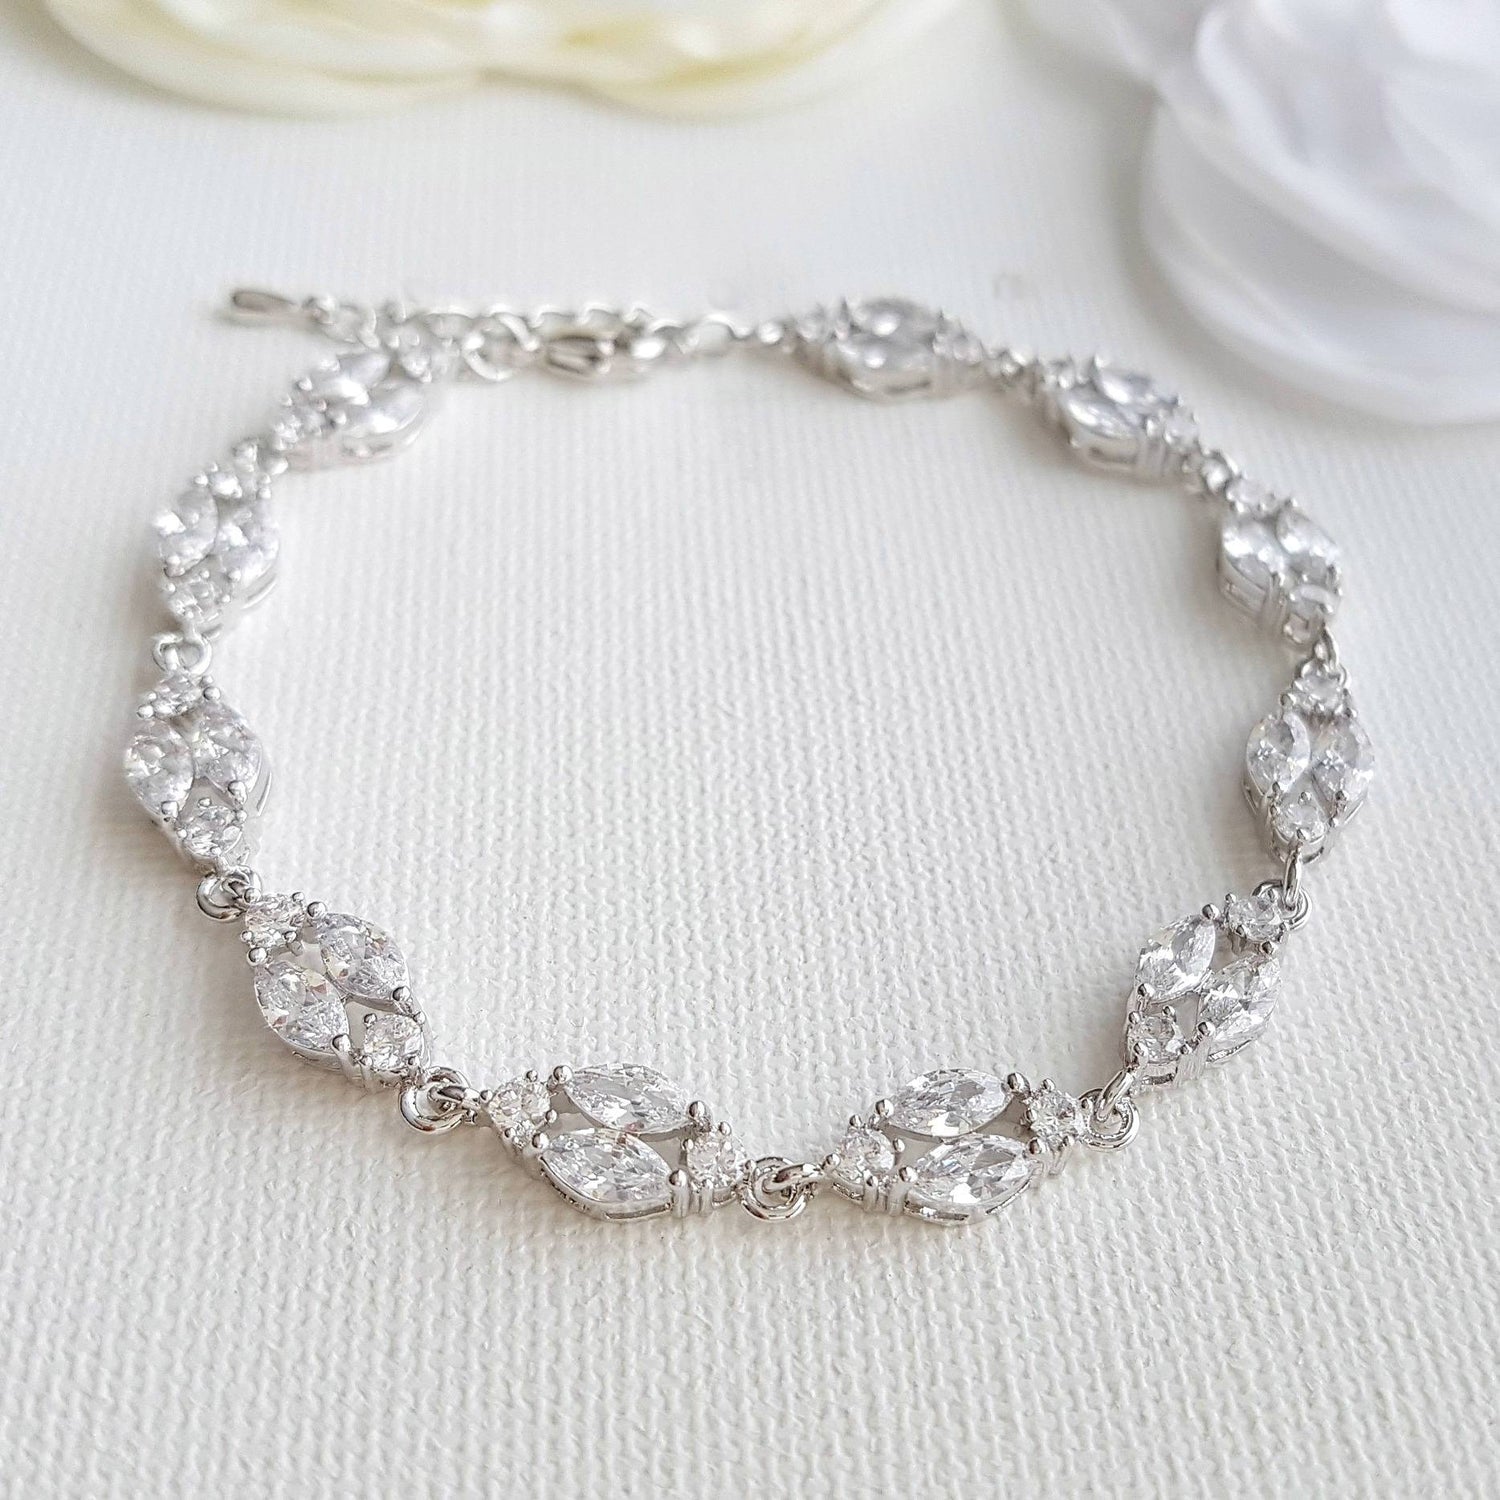 Dainty Rose Gold Crystal Bracelet for Weddings and Brides-Hayley - PoetryDesigns